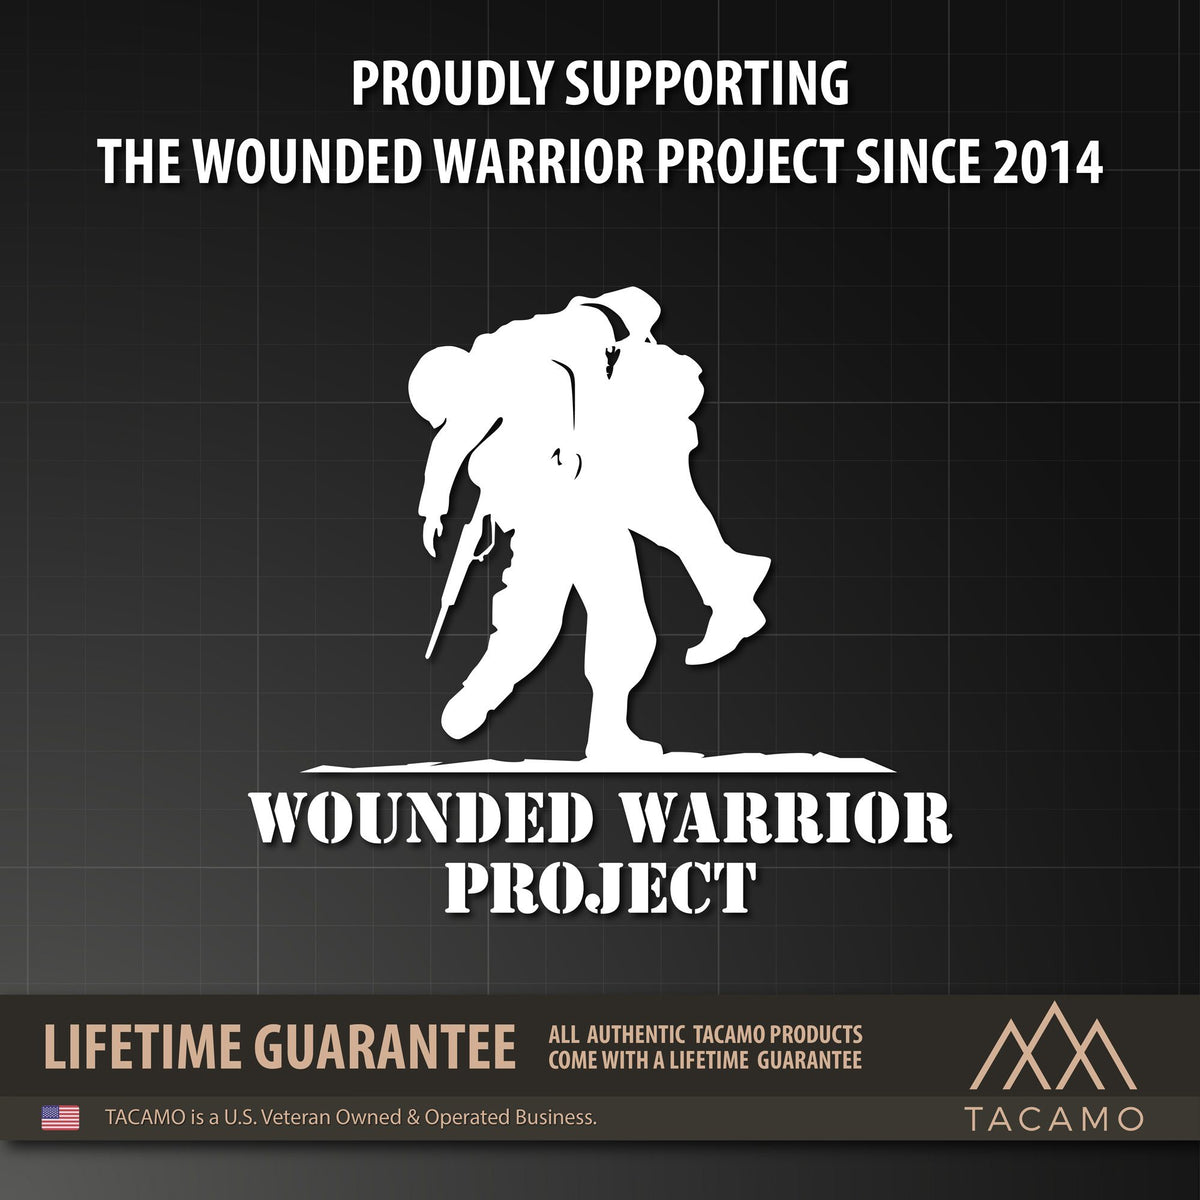 Solar Power Bank - Wounded Warrior